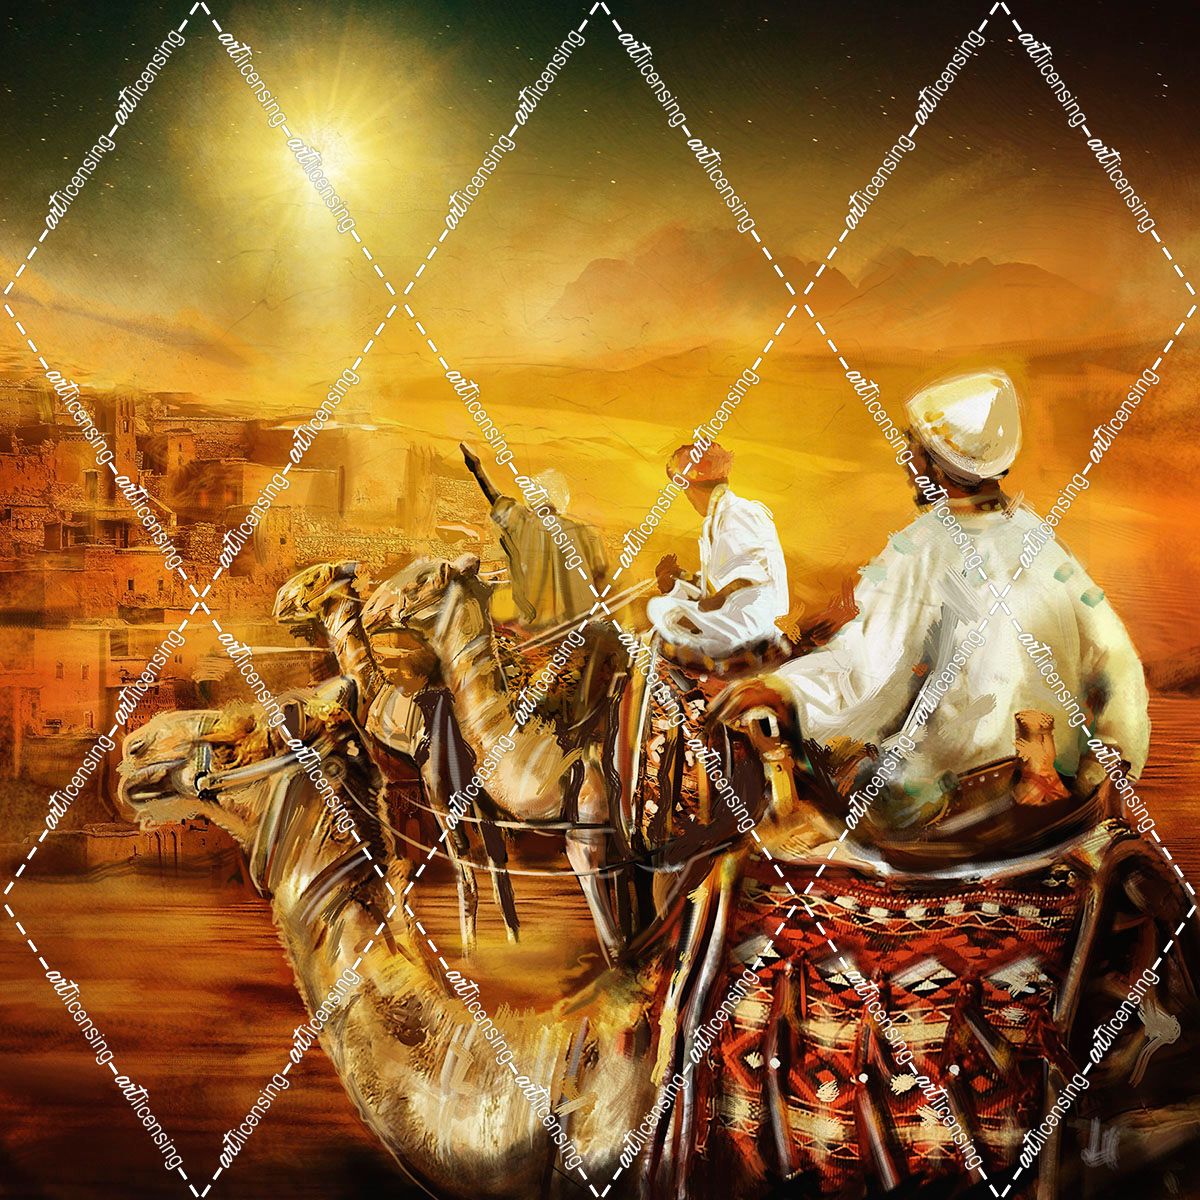 Three Three Wise Men, Biblical Magi, Three Wise Men, Kings, Digital, Camels, Animals, Travelers, People, Religious, Followed a Star, Arabic, Middle Eastern City, Cities, Stars, Starry Sky, Deserts, Star of BethlehemWise Men